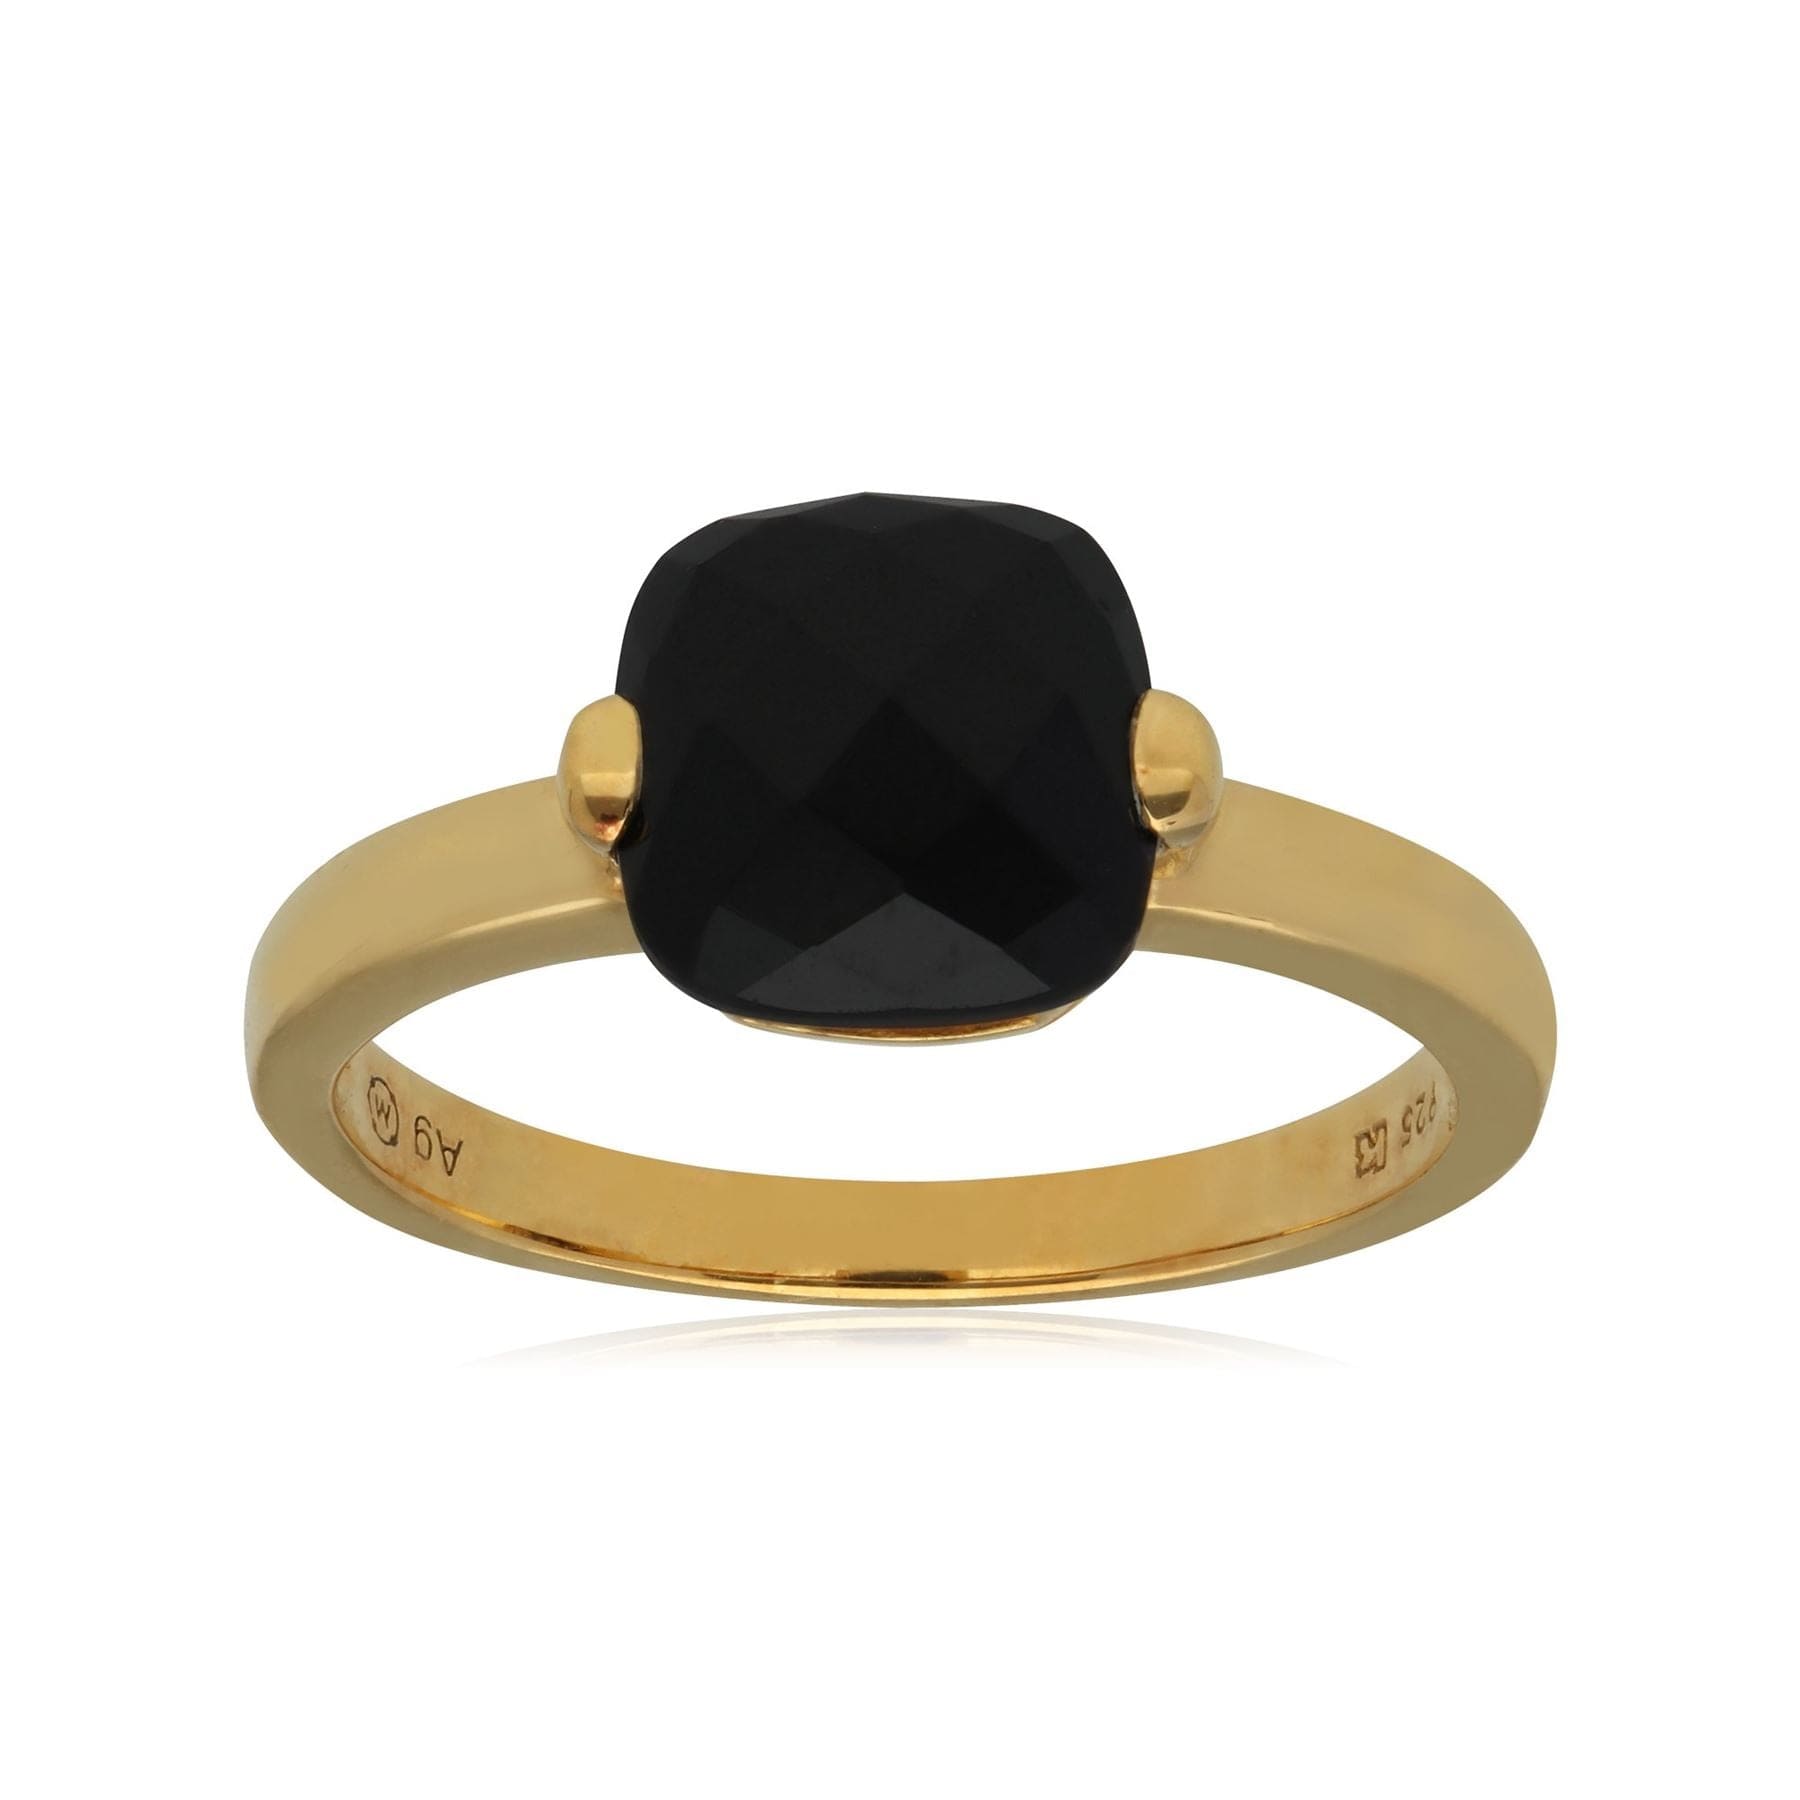 Kosmos Black Spinel Cocktail Ring in Yellow Gold Plated Sterling Silver - Gemondo